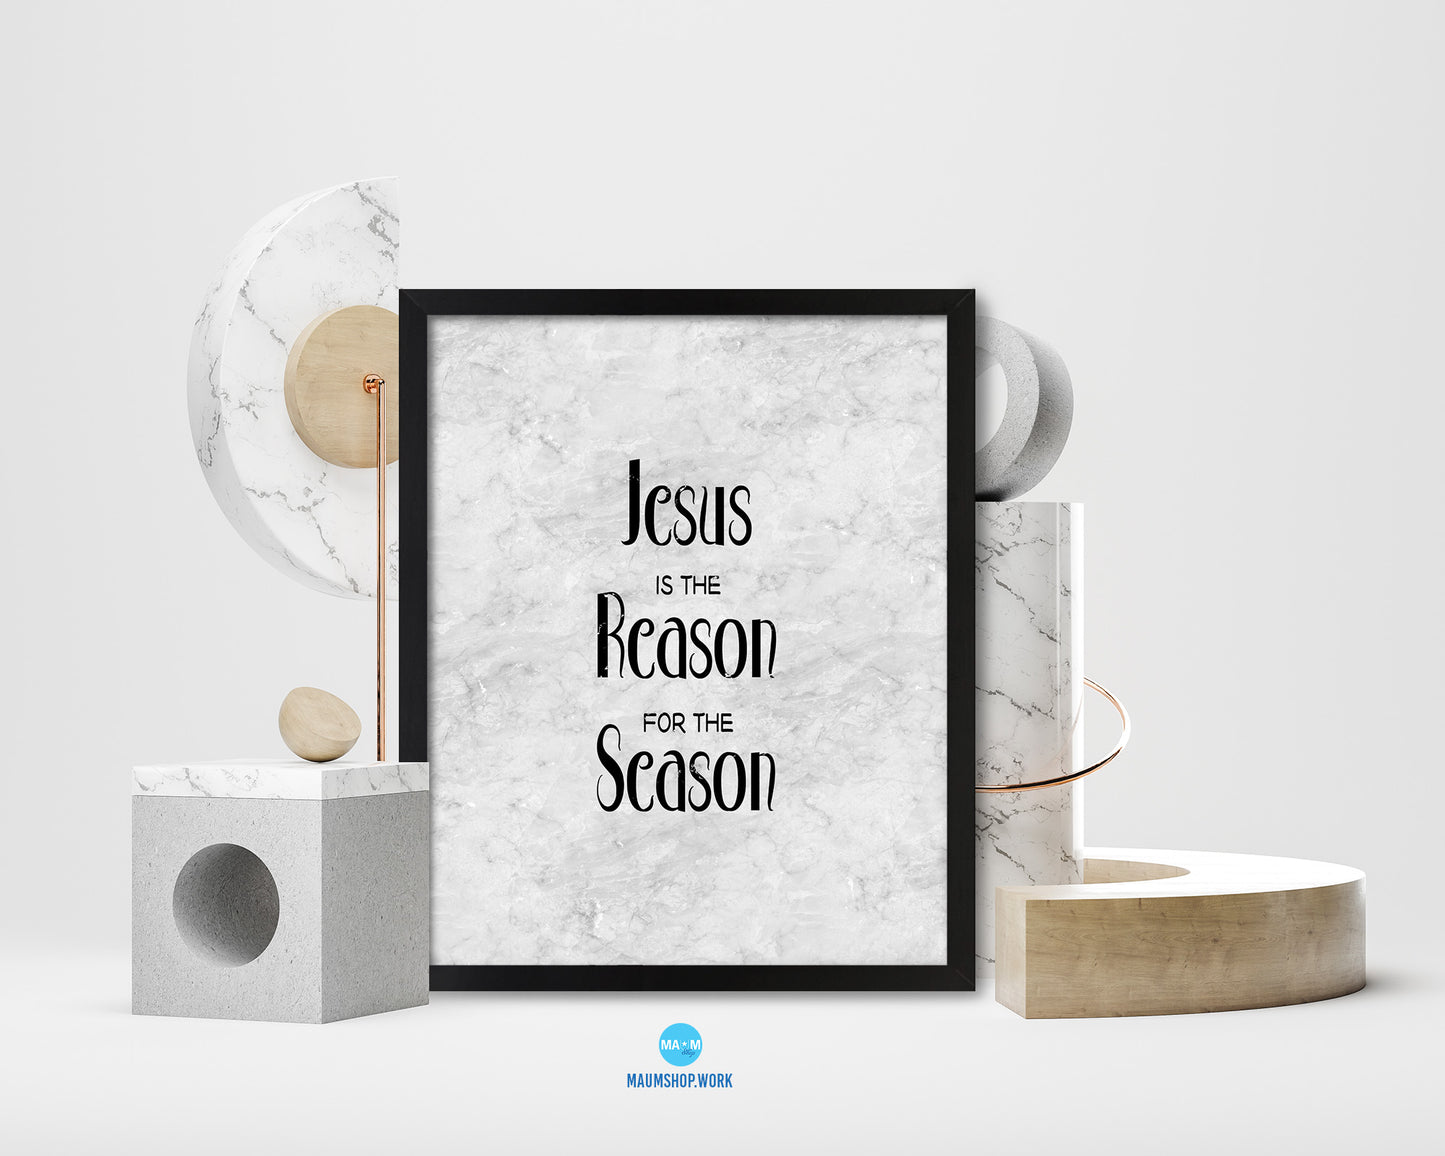 Jesus is the reason for the season Bible Scripture Verse Framed Print Wall Art Decor Gifts